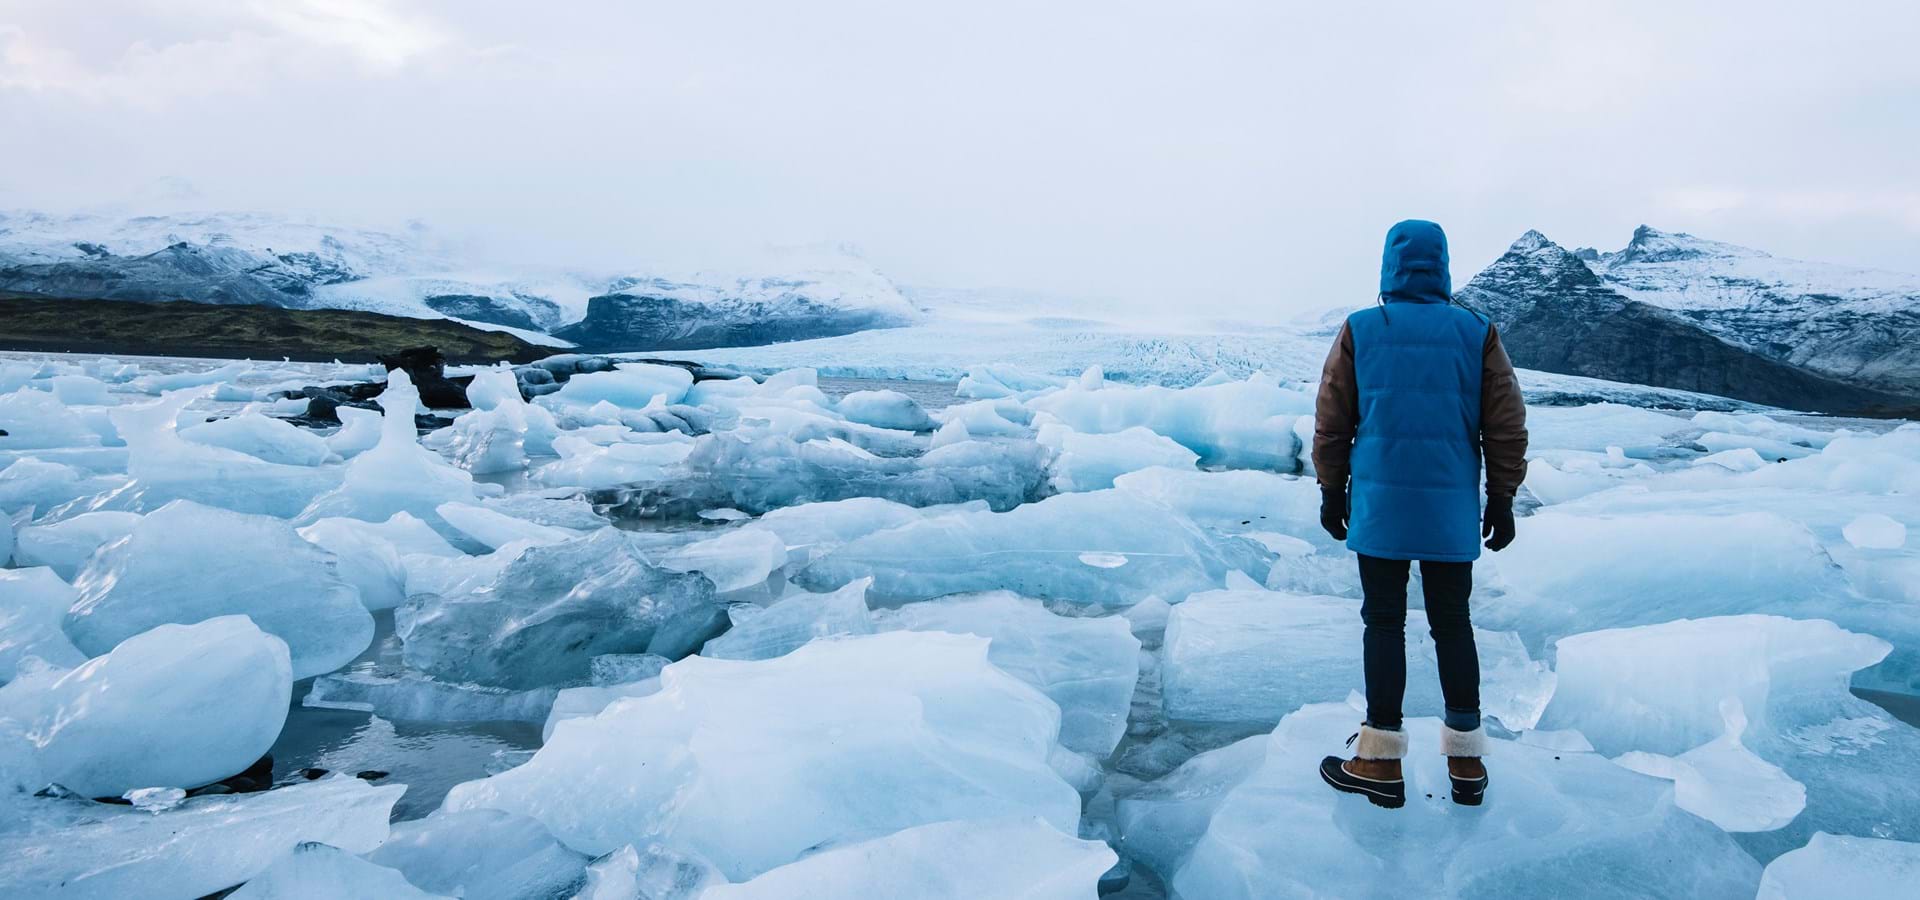 Man standing in front of icy sea